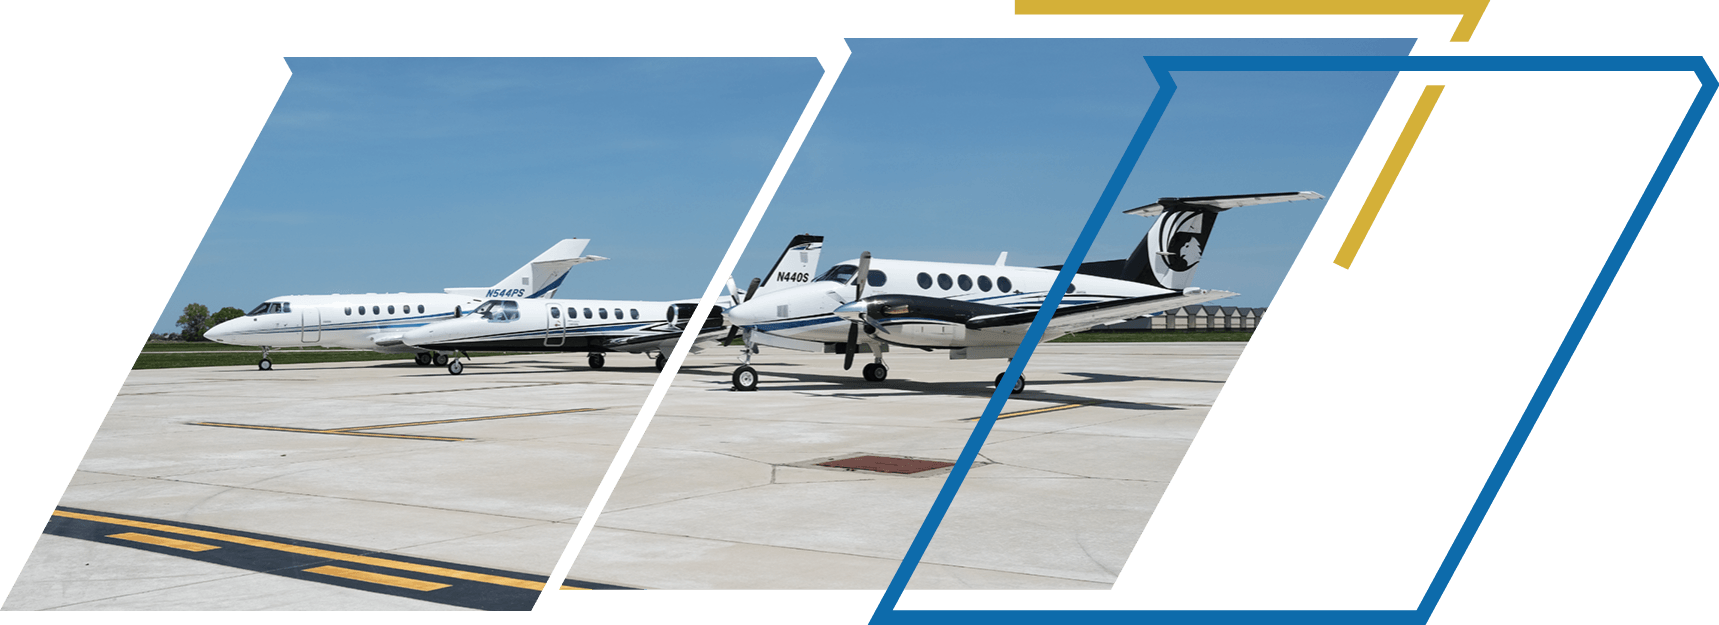 When it comes to sales & acquisitions, Griffing Flying Service brings an unparalleled level of commitment, network reach & diversity to buying & selling aircraft